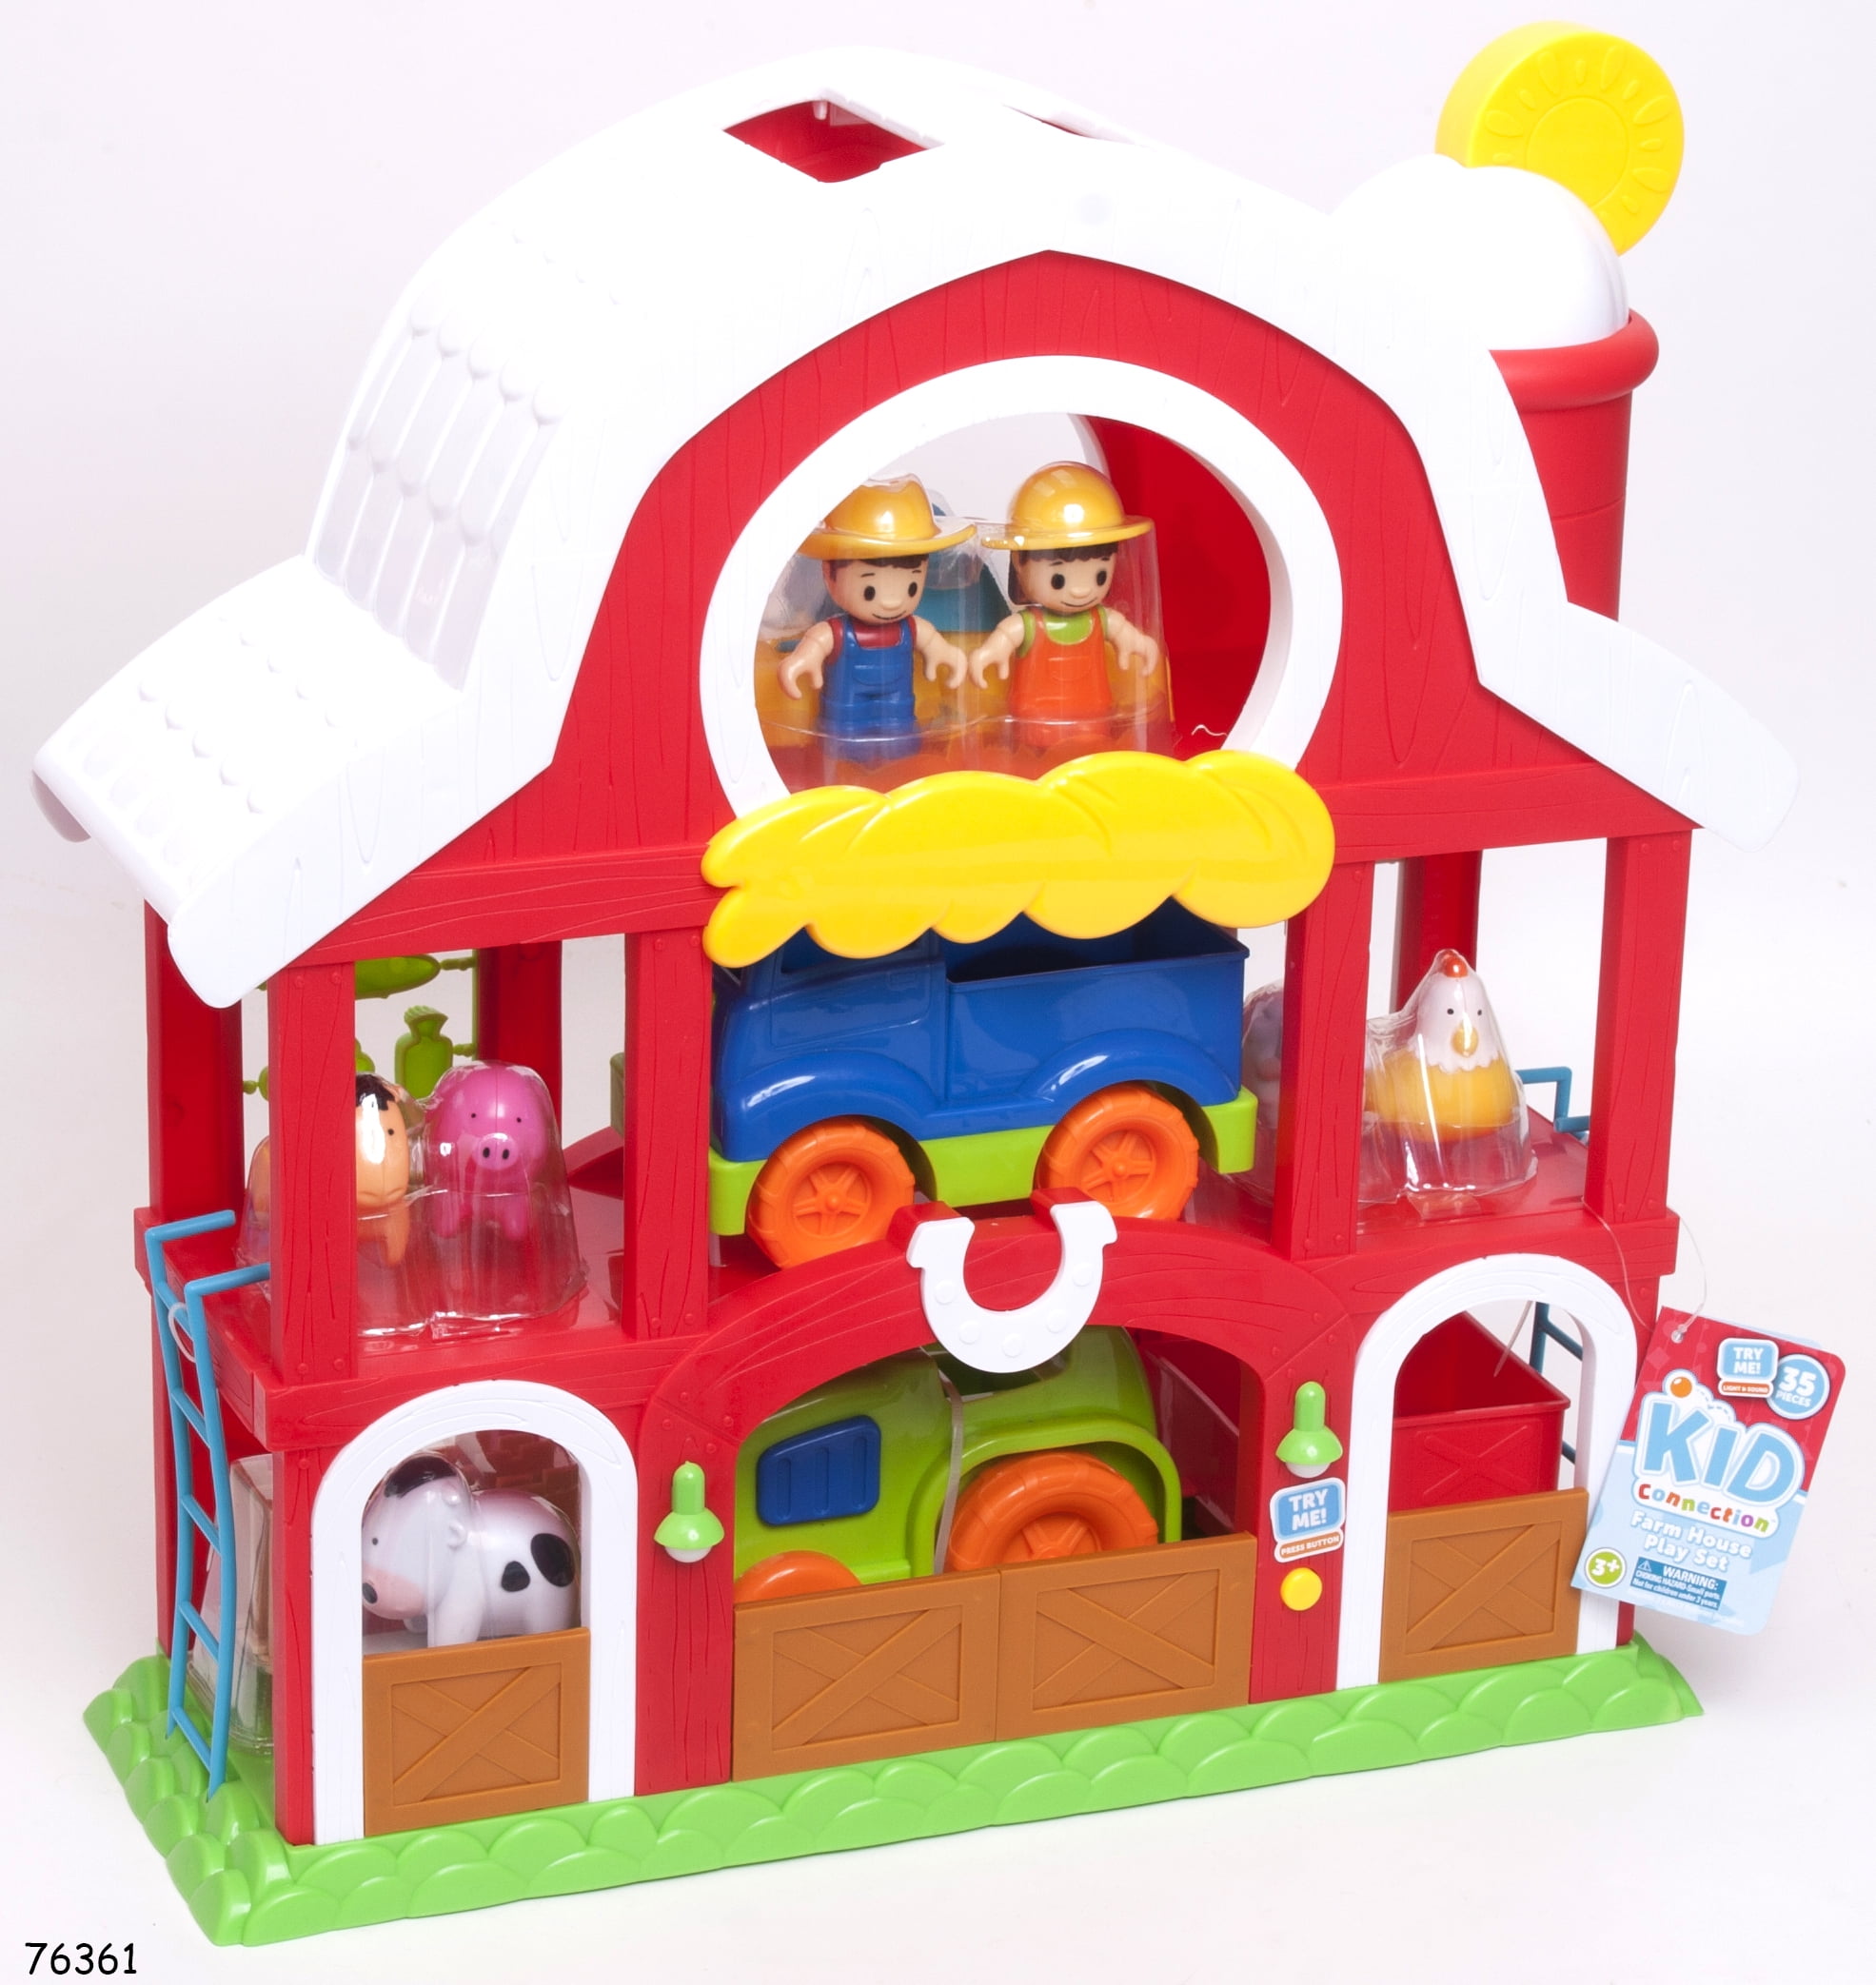 Kid Connection Farm House Play Set with Animals - Lights Up with Sound,35 Pieces